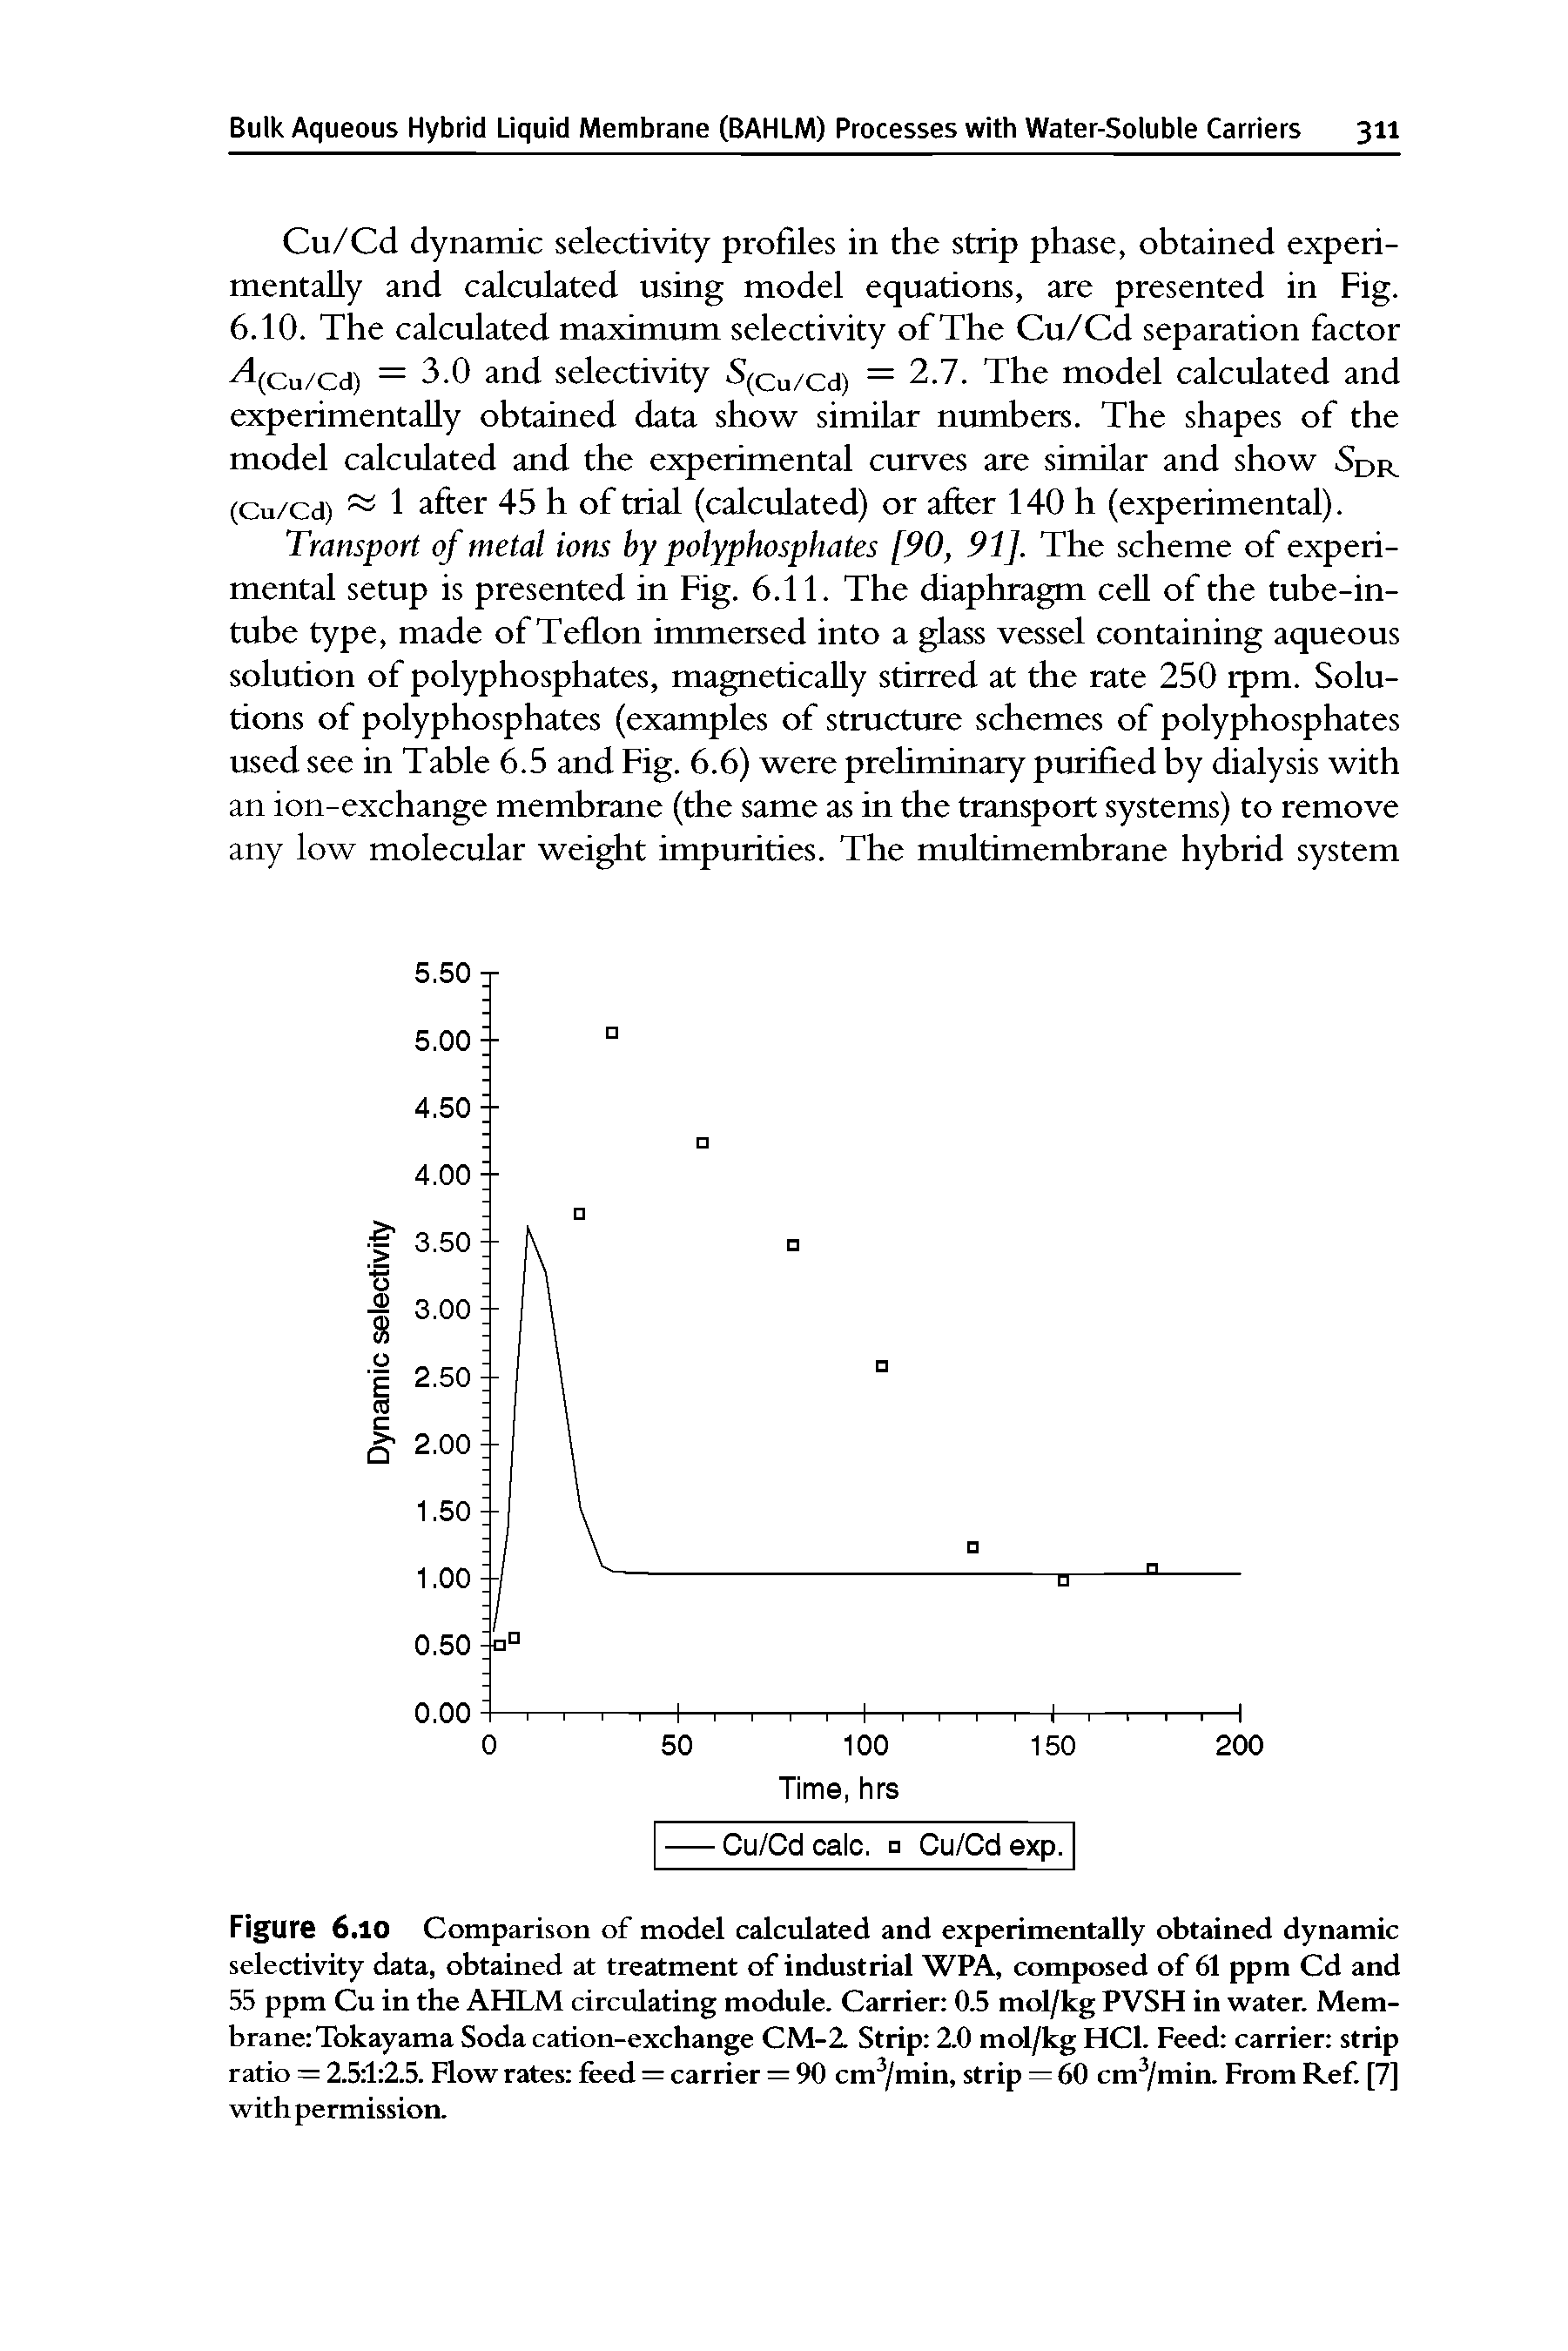 Figure 6.10 Comparison of model calculated and experimentally obtained dynamic selectivity data, obtained at treatment of industrial WPA, composed of 61 ppm Cd and 55 ppm Cu in the AHLM circulating module. Carrier 0.5 mol/kg PVSH in water. Membrane Tokayama Soda cation-exchange CM-2 Strip 2.0 mol/kg HCl. Feed carrier strip ratio = 2.5 1 2.5. Flow rates feed = carrier = 90 cm /min, strip = 60 cm /min. From Ref. [7] with permission.